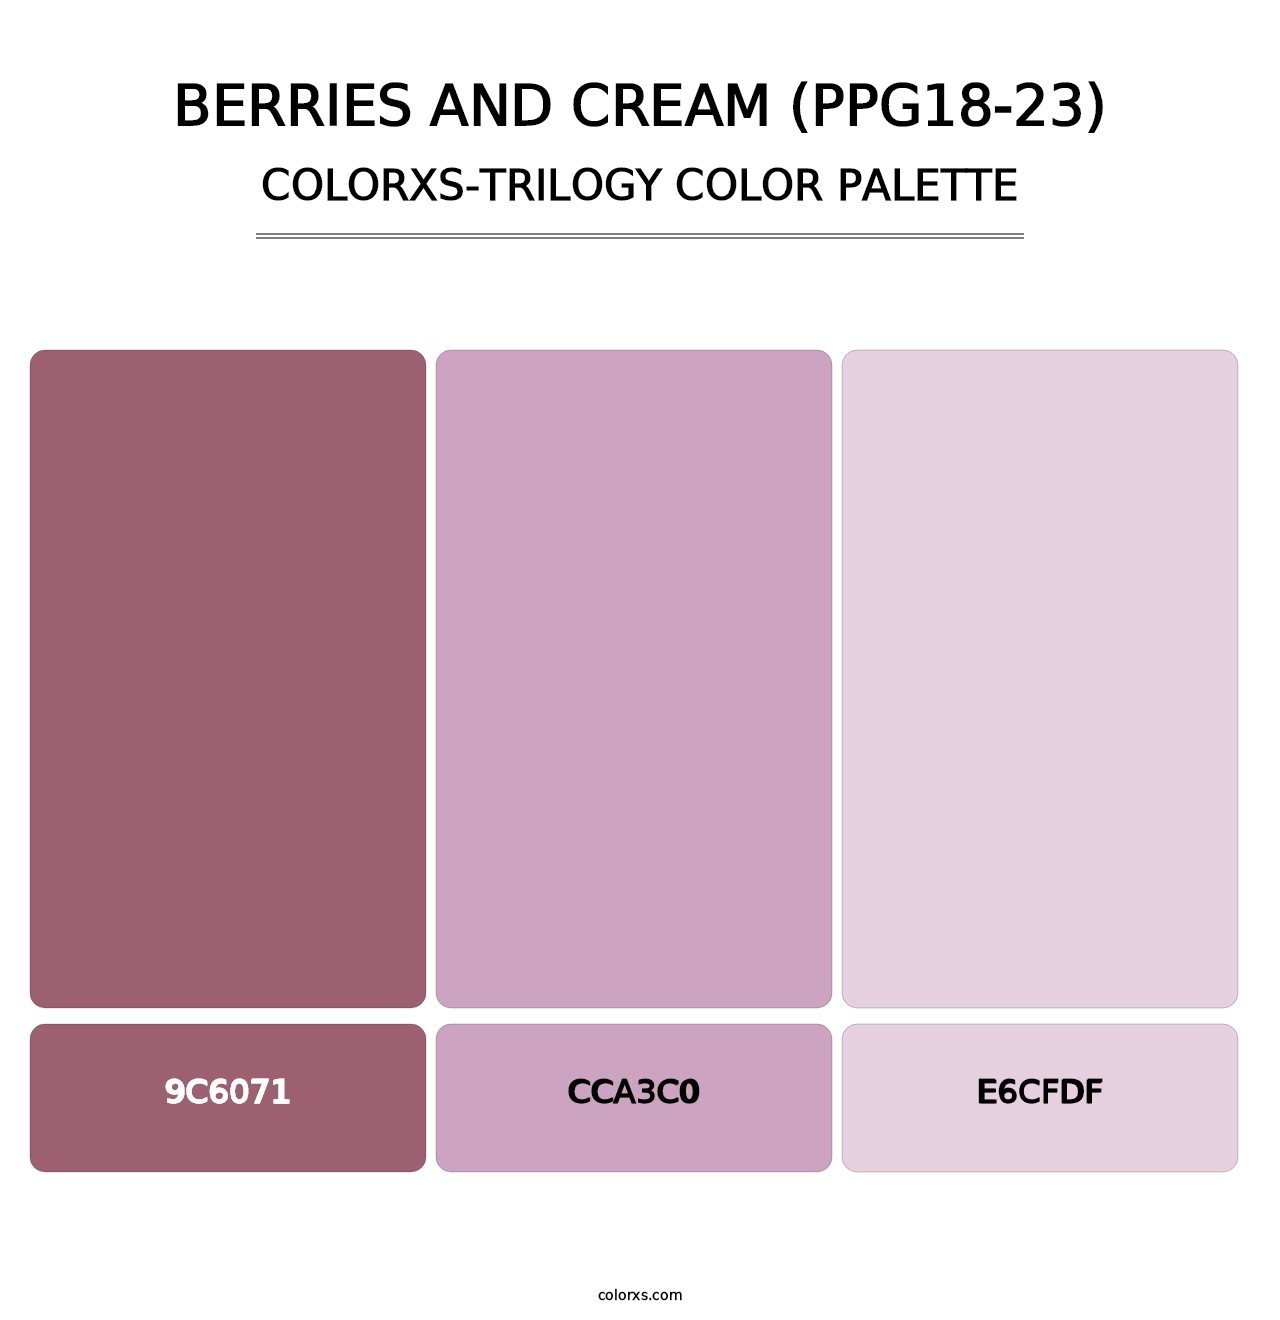 Berries And Cream (PPG18-23) - Colorxs Trilogy Palette